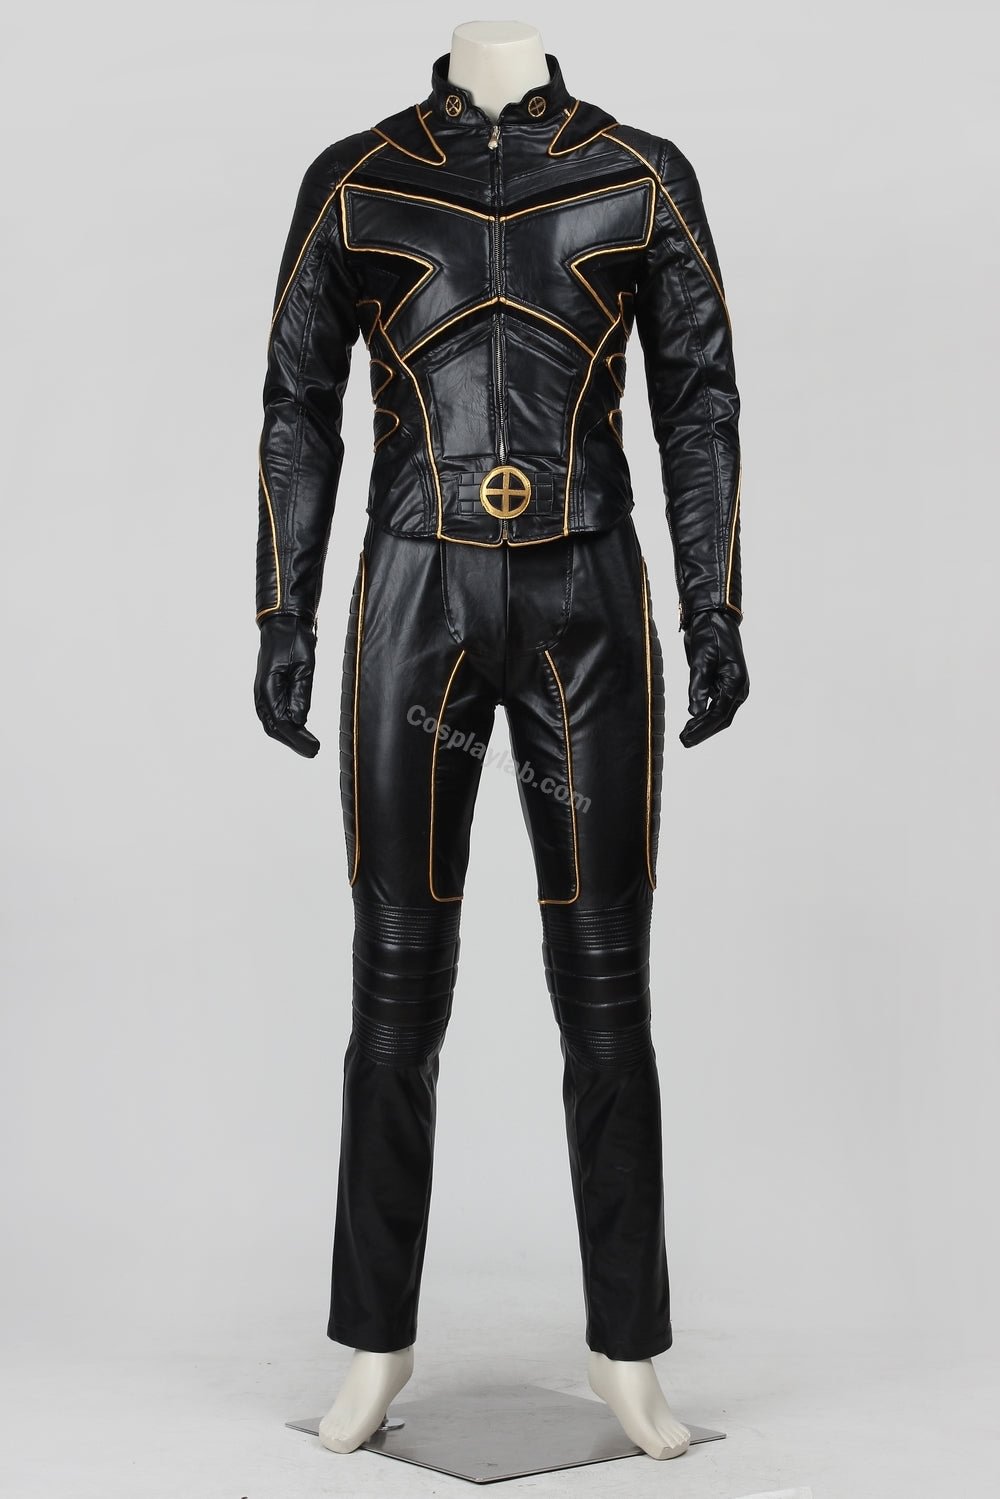 x men x force wolverine boys adults black cosplay halloween costume suit outfit By CosplayLab